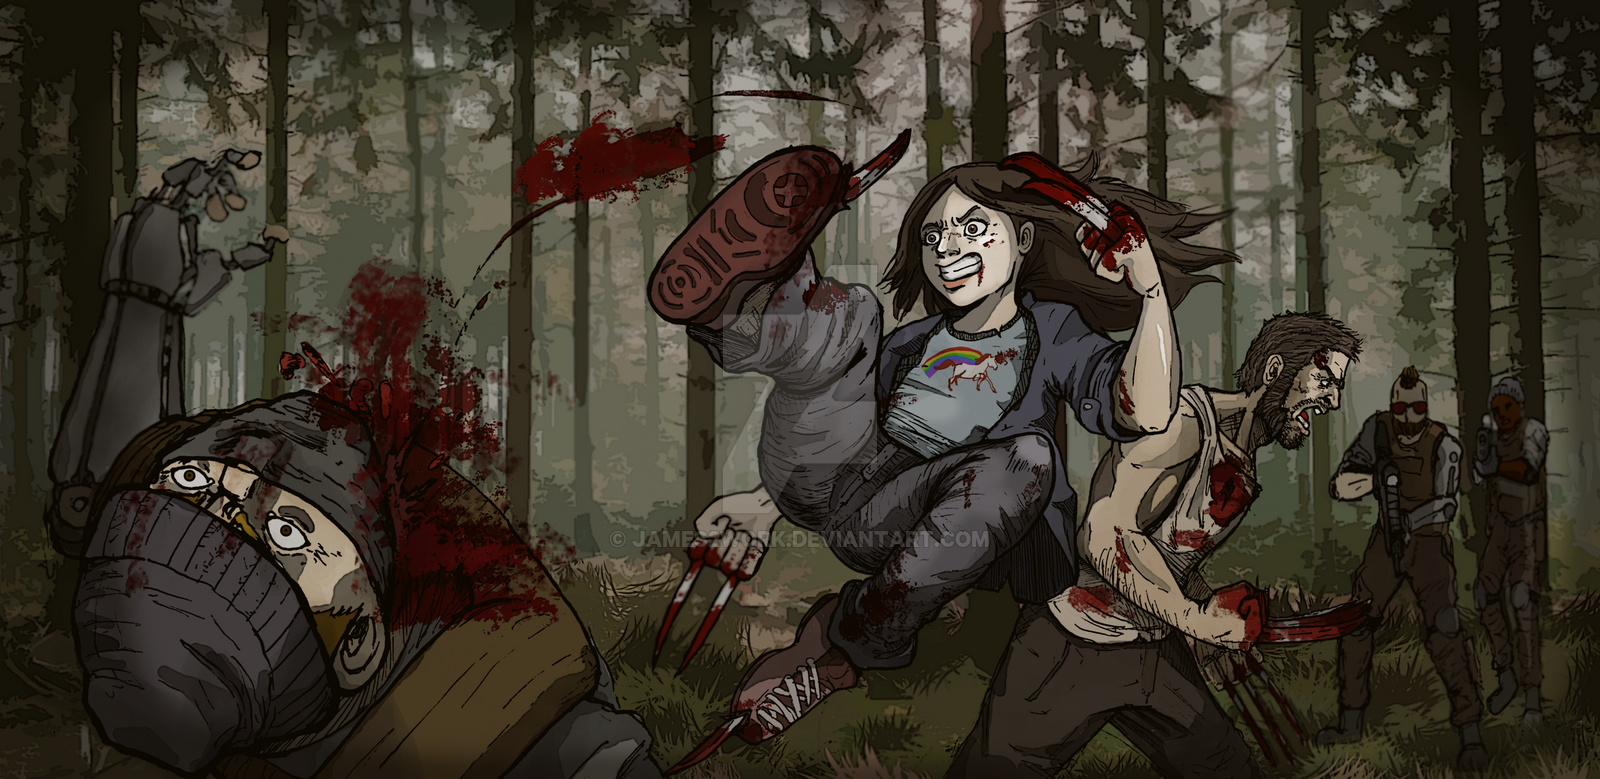 wolverine_and_x23__laura_kinney____forest_fight_by_james2work-db2pztz.png